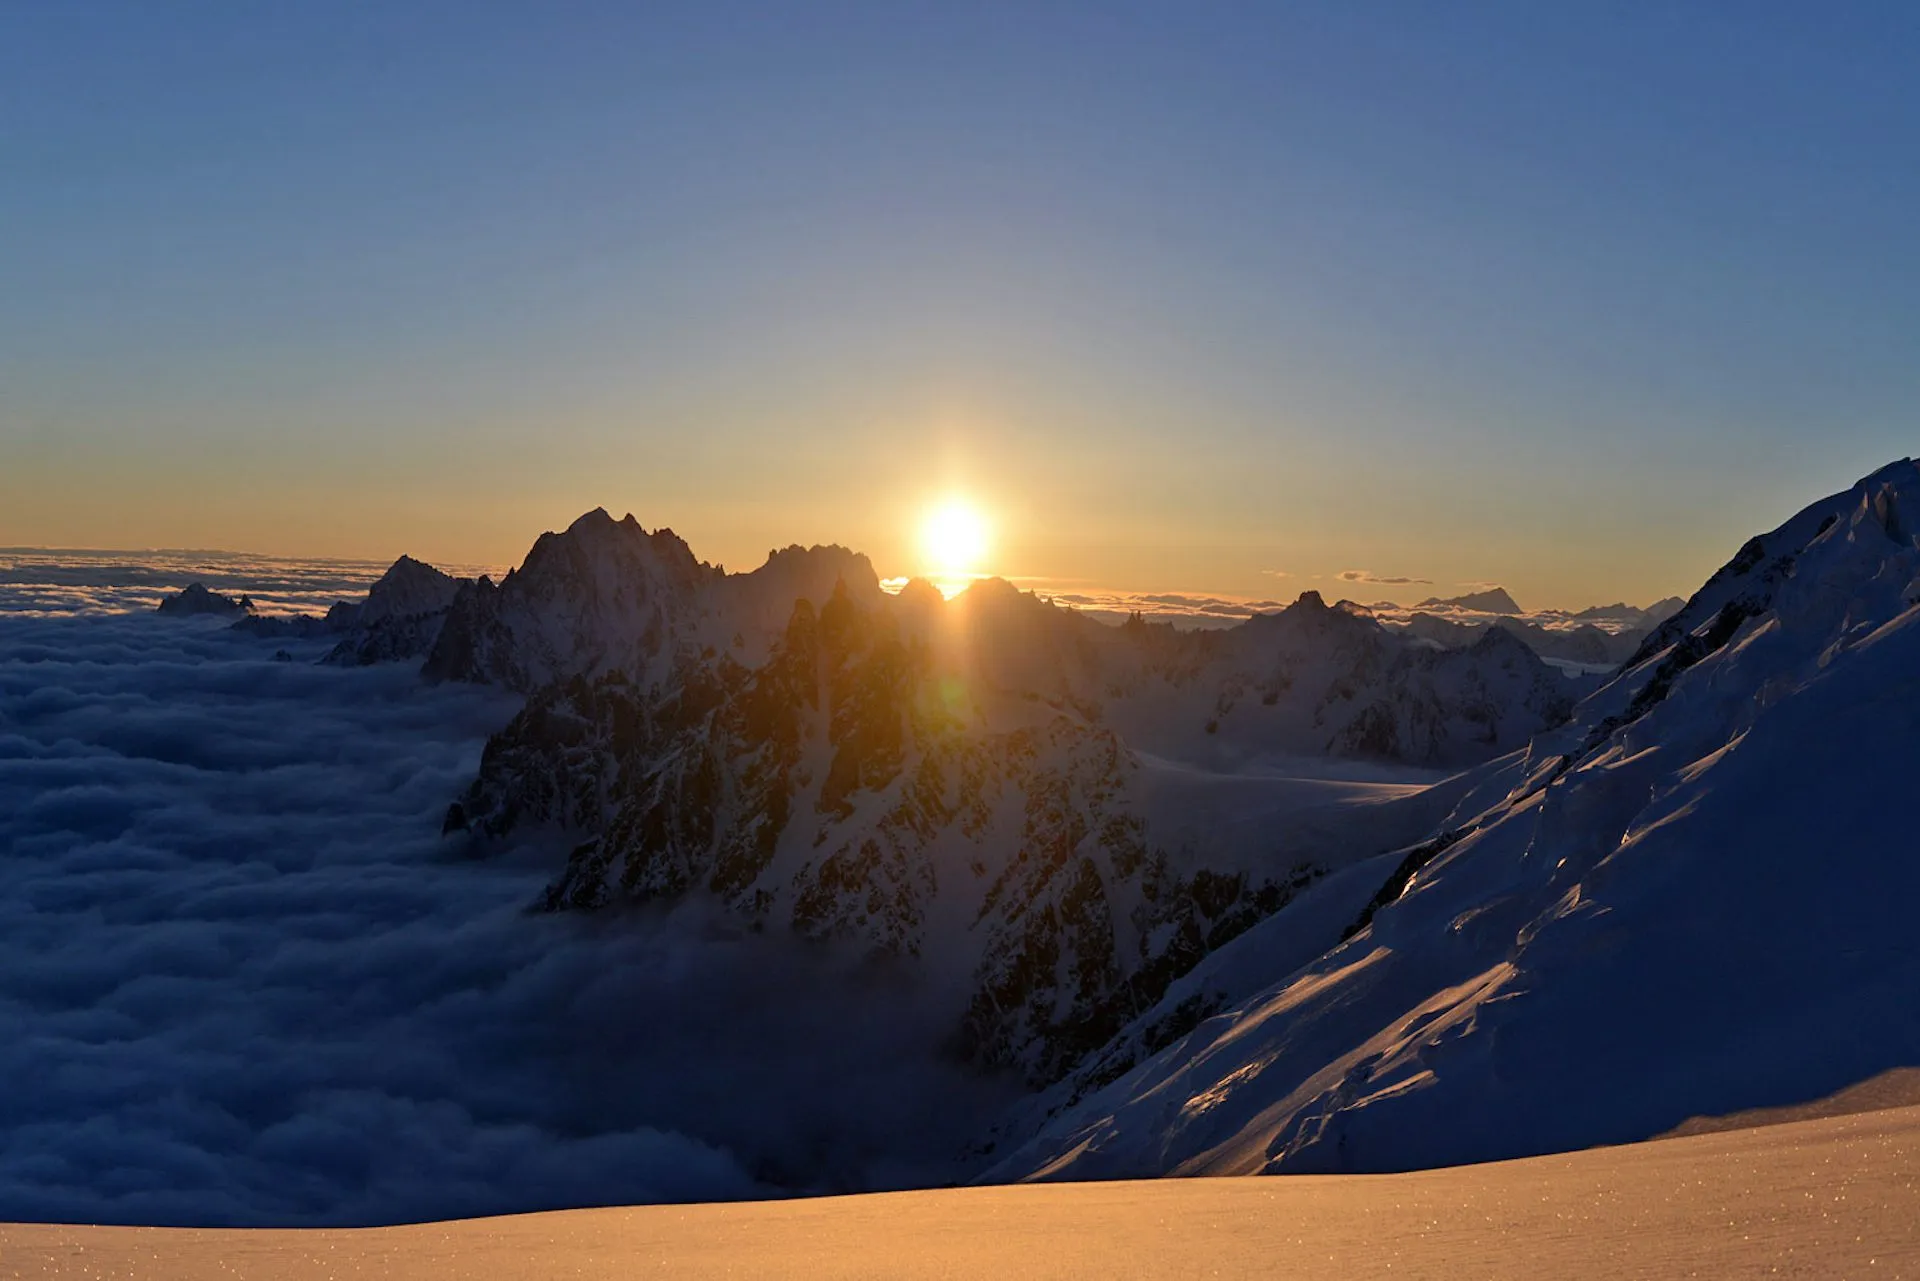 Sunrise on the way to Mont Blanc